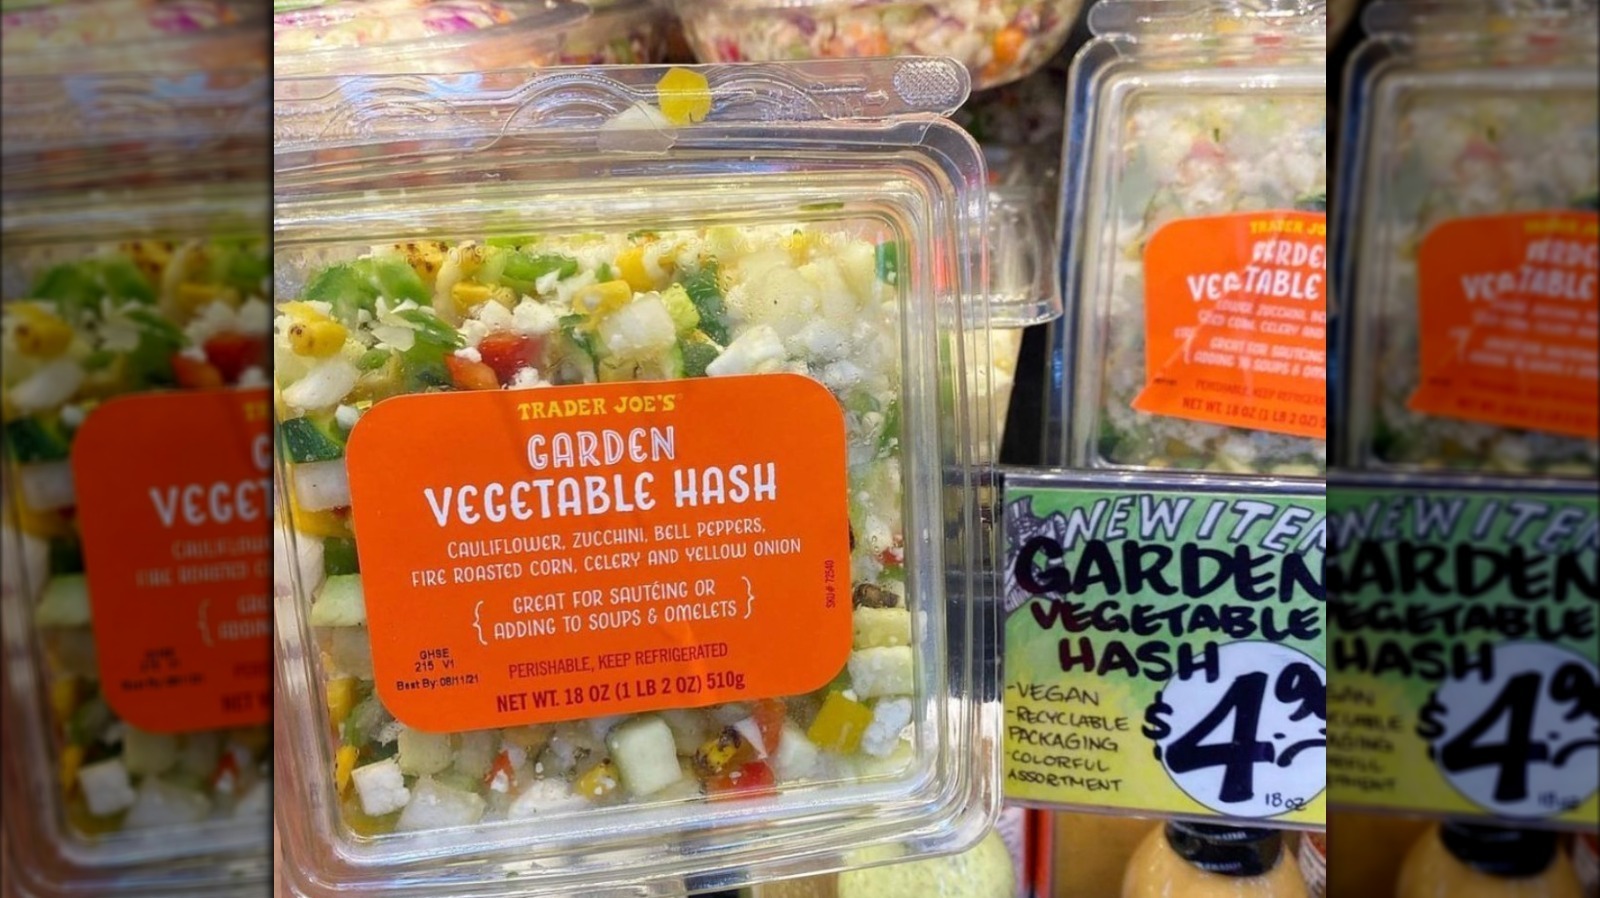 Trader Joe's Shoppers Are So Excited For Its New Garden Vegetable Hash